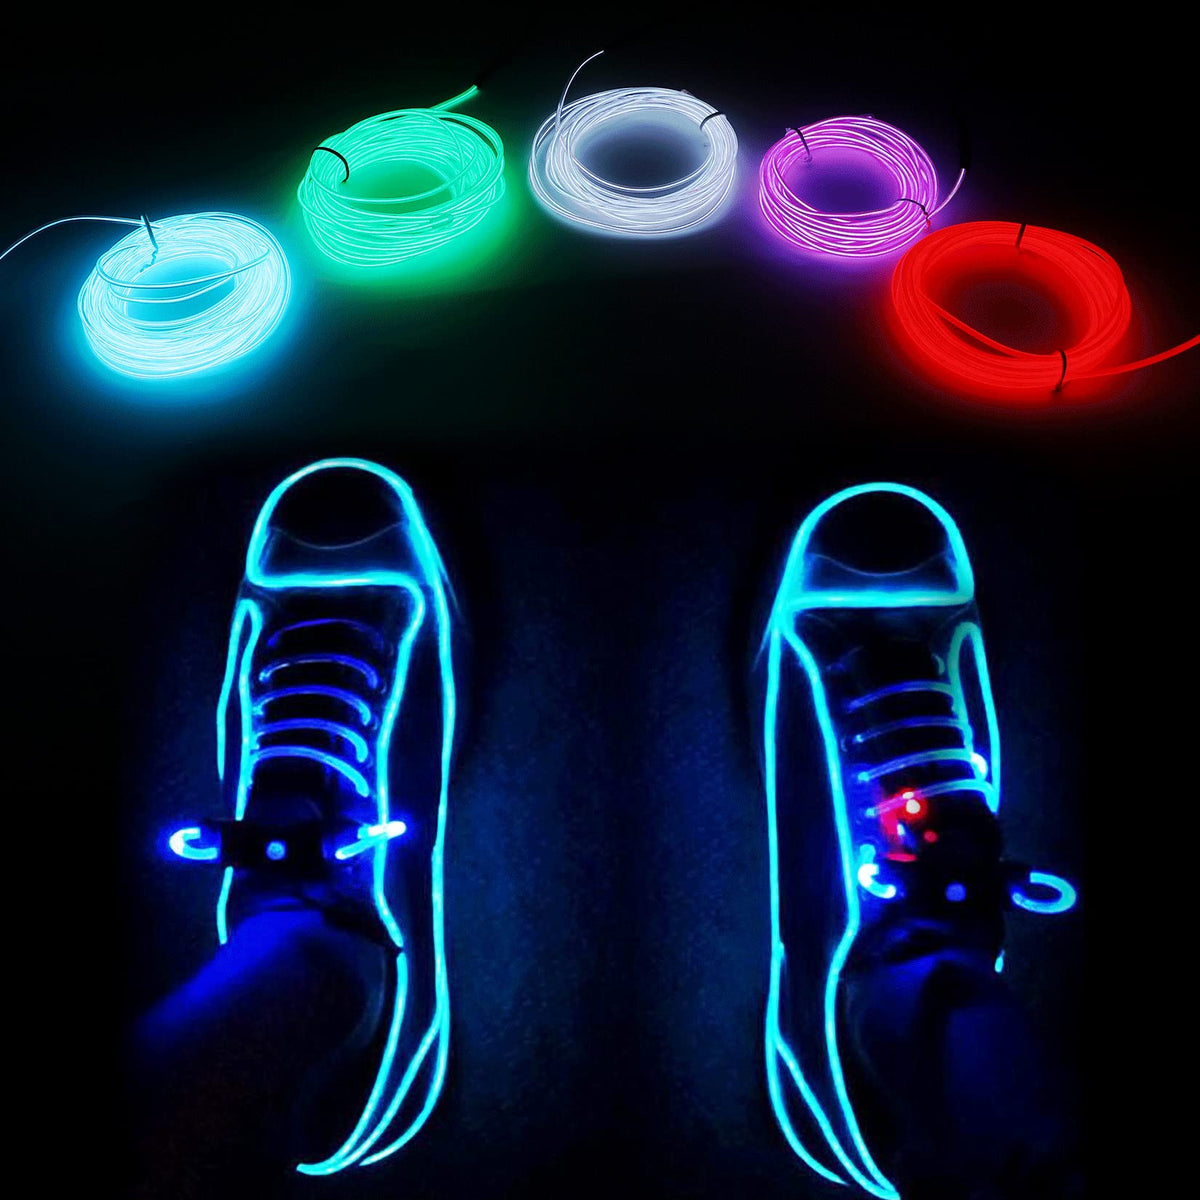 Neon lit shoes dance at party | Stock Video | Pond5